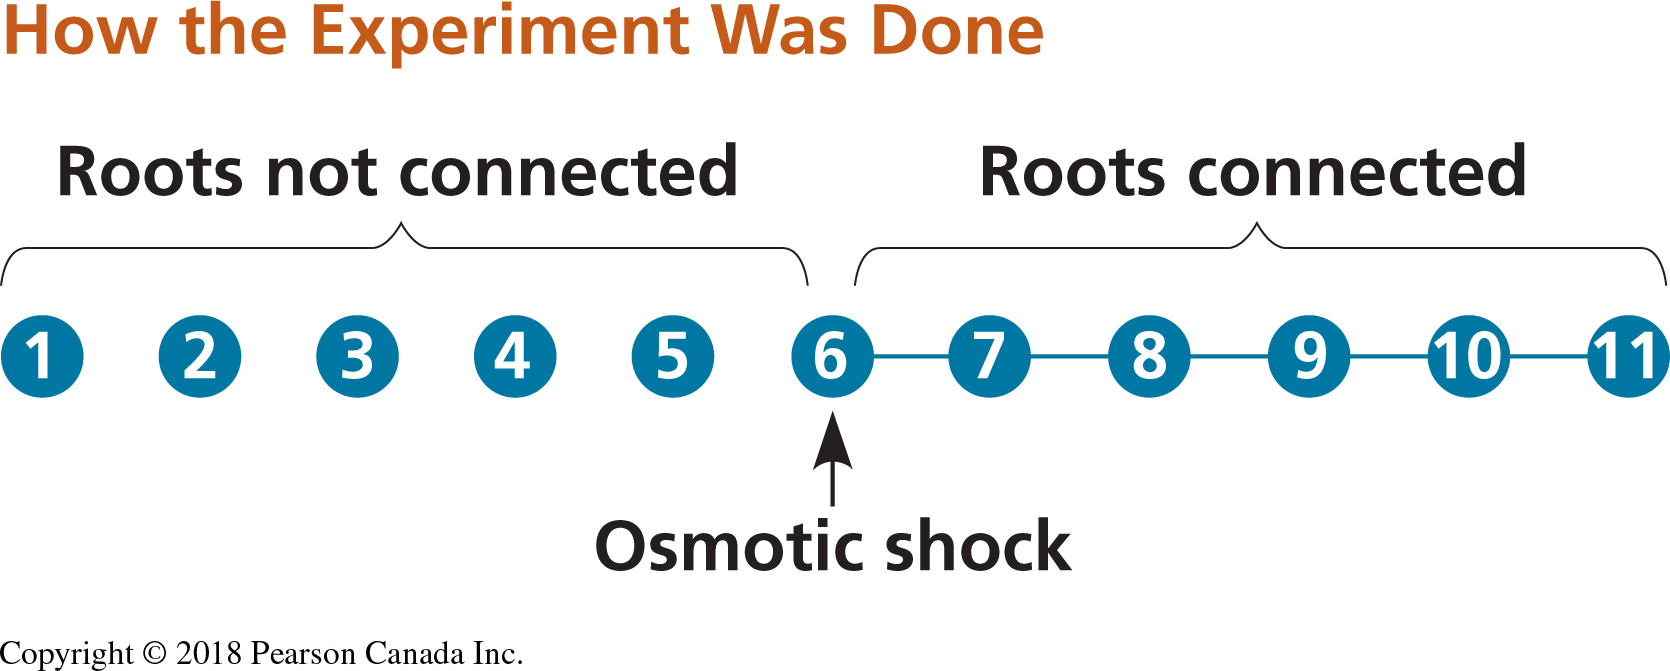 Experimental set up for testing stress cues. Circles represent plants and connector lines represent the plants with connected roots. The numbers of the plants correspond to those of Table 14.2. Osmotic stress was induced in plant 6 (Modified from Falik et al., 2011).